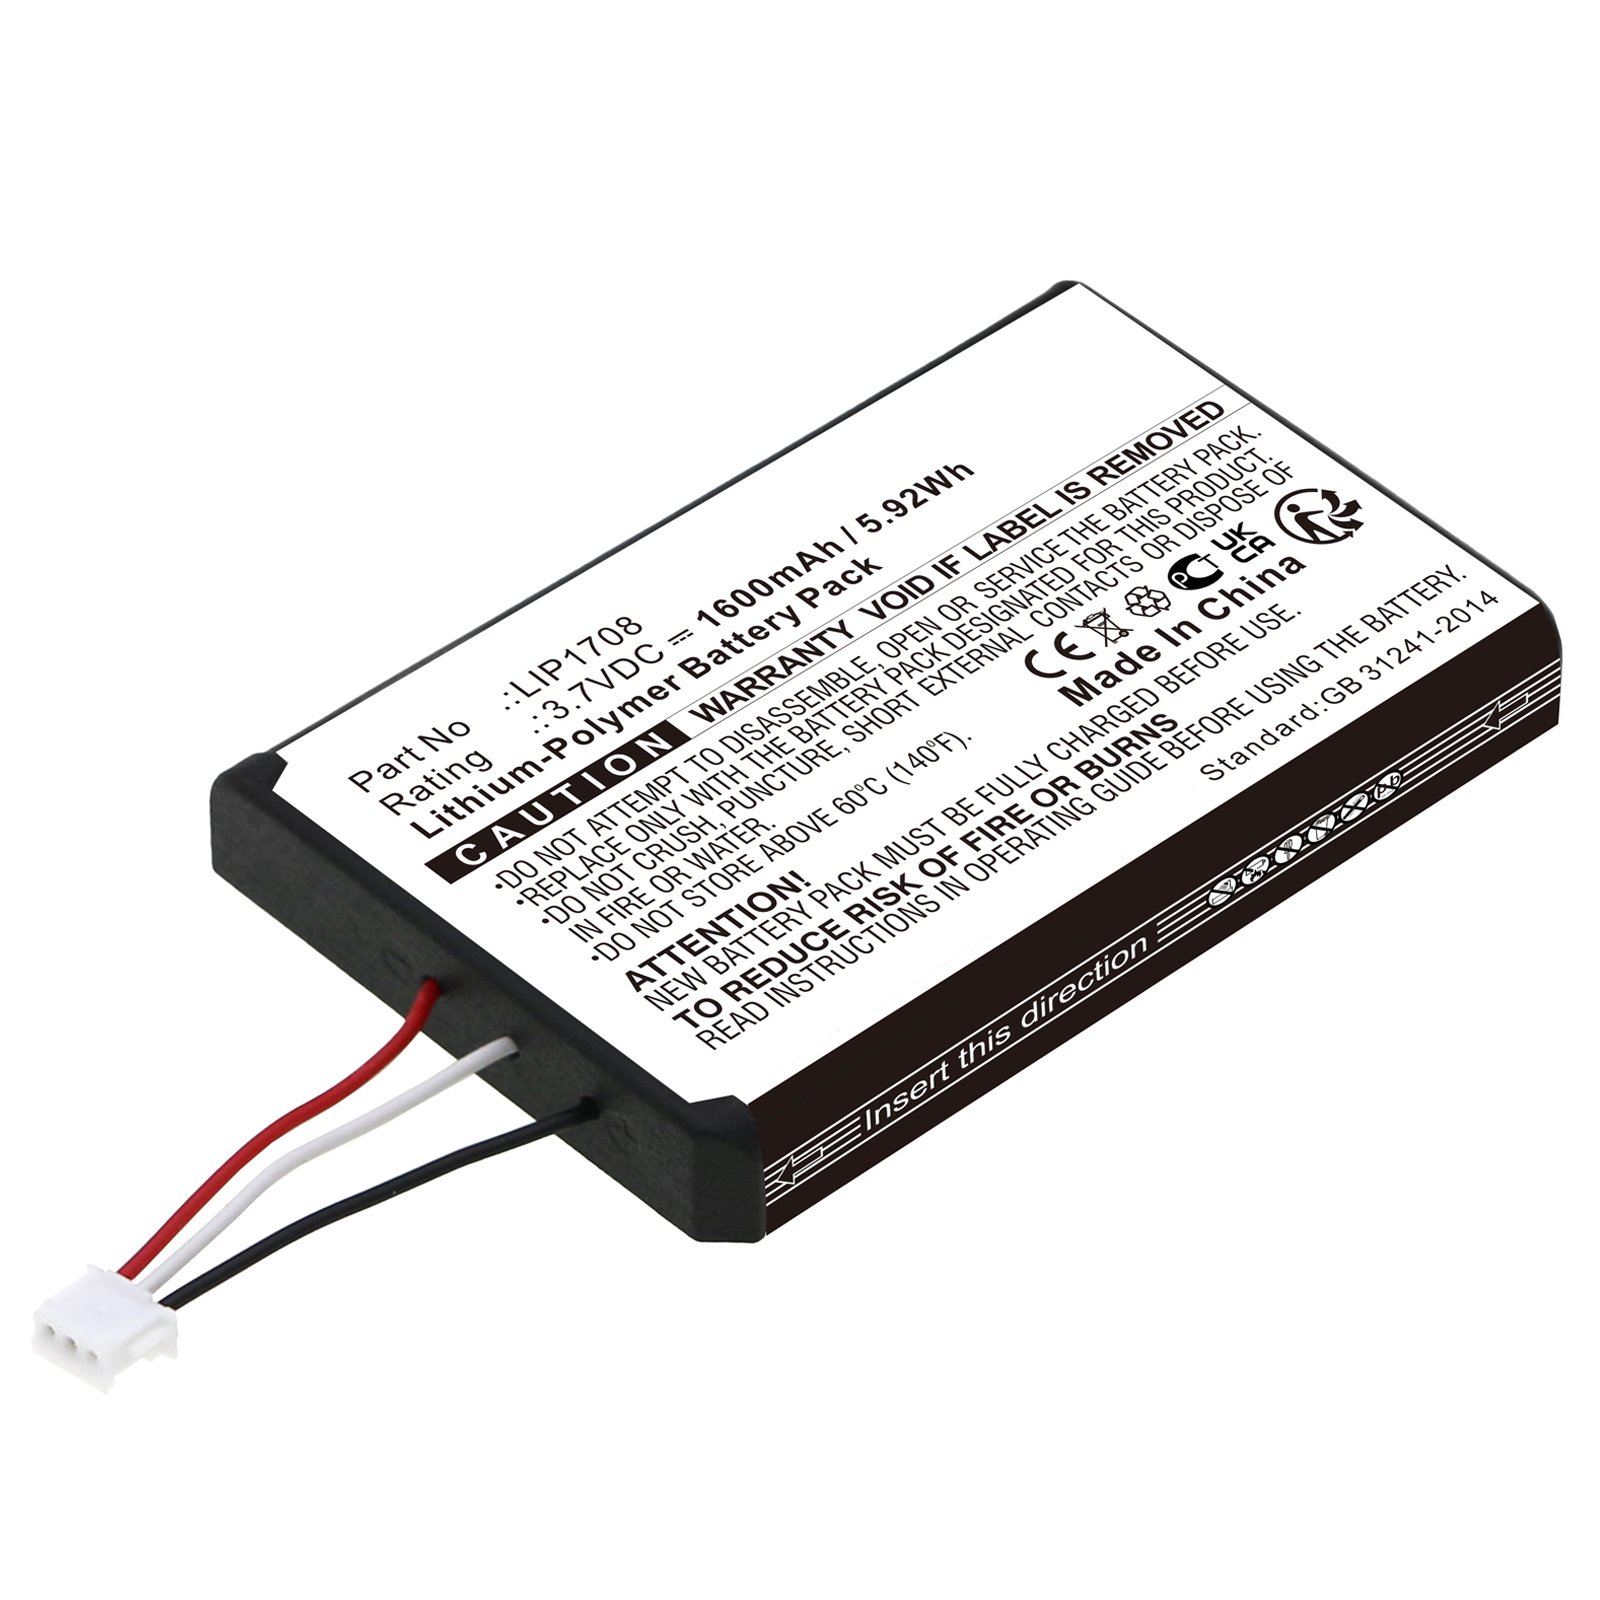 Synergy Digital Game Console Battery, Compatible with Sony LIP1708 Game Console Battery (Li-Pol, 3.7V, 1600mAh)